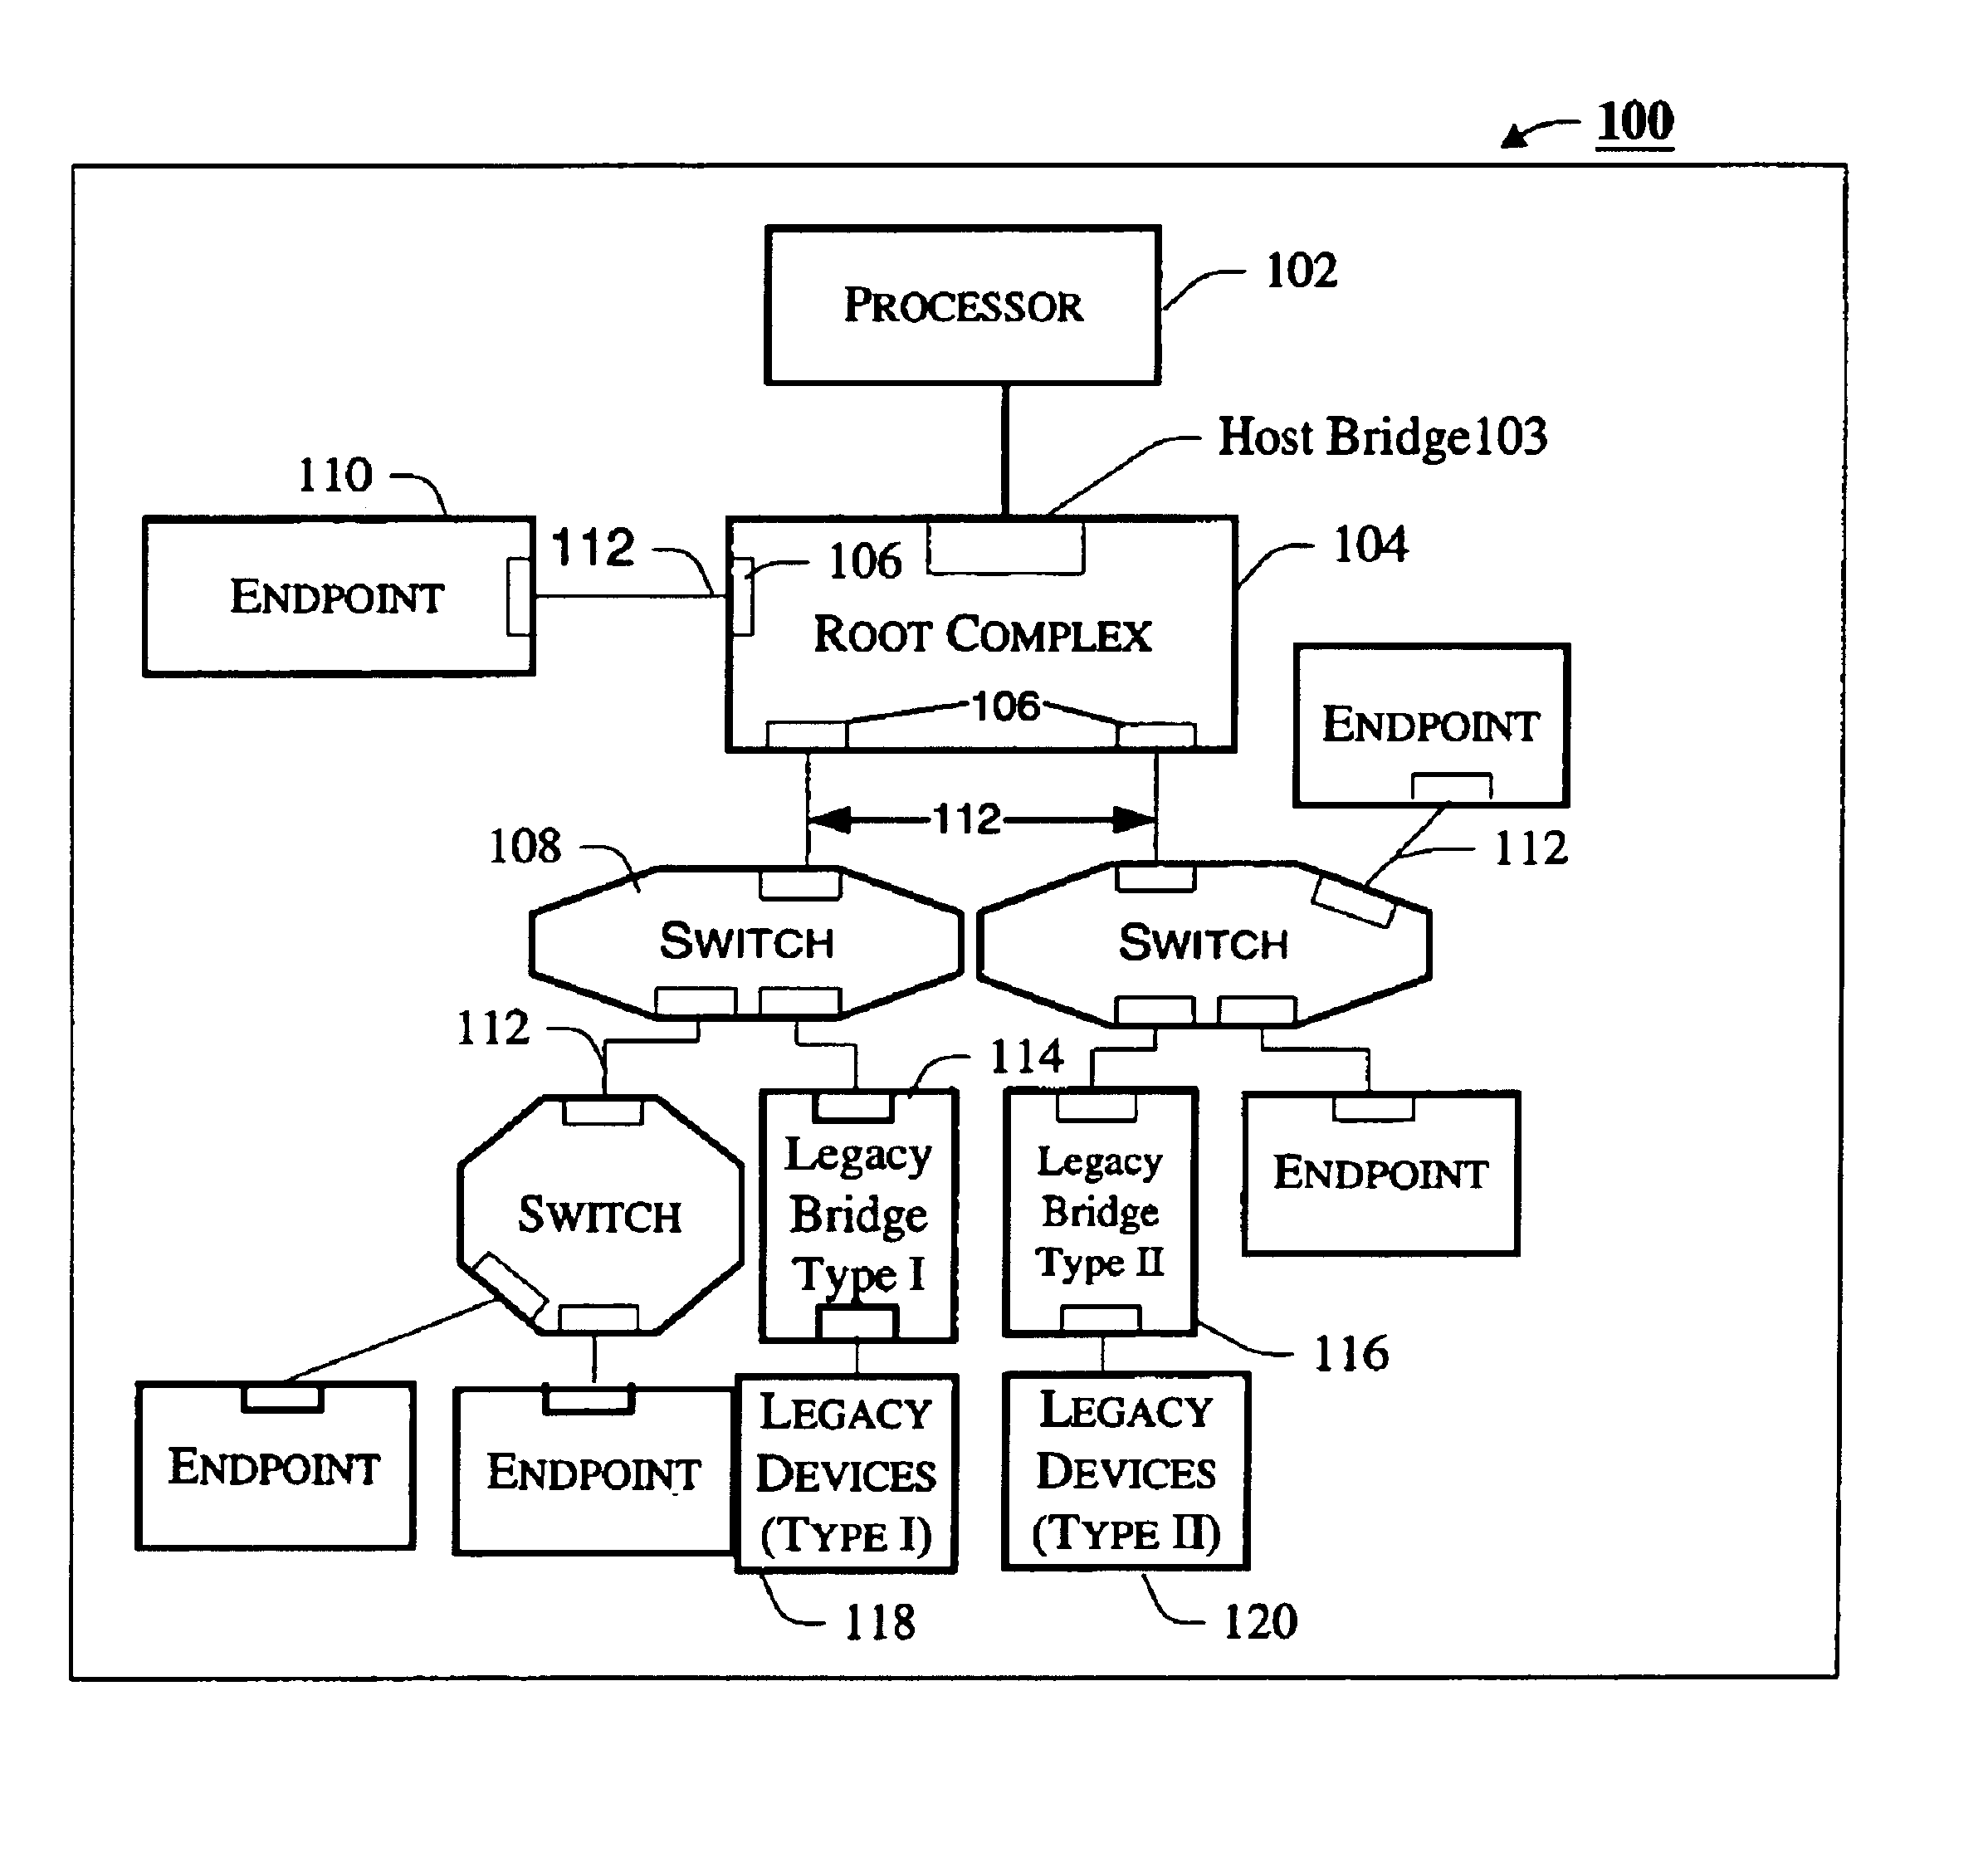 Communicating transaction types between agents in a computer system using packet headers including an extended type/extended length field